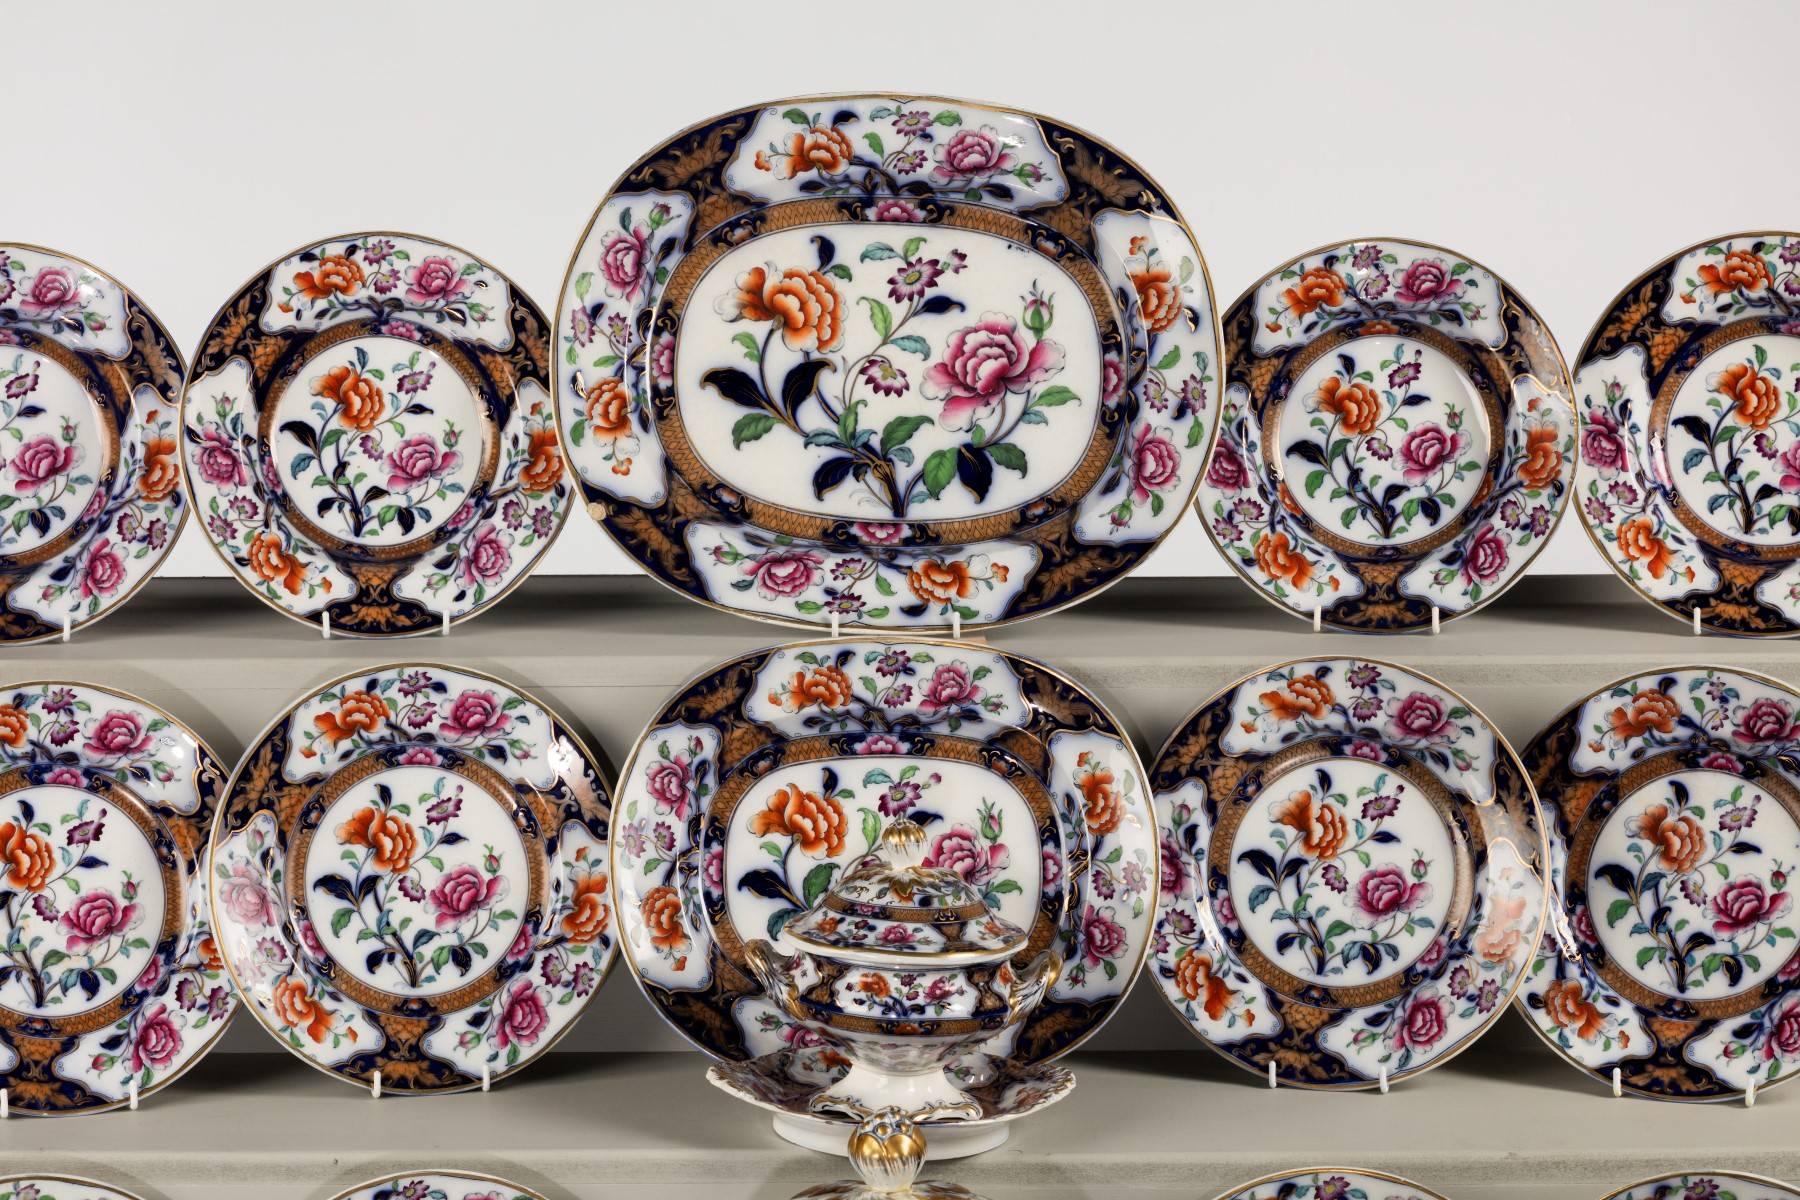 A most attractive mid-19th century Staffordshire part dinner service with very colourful flowers in reserve grounds. Blue frame work with finely gilded detail.

Measures: 4 x soup bowls. 
7 x 9 inch plates.
13 x 10 inch plates.
3 x platters.
1